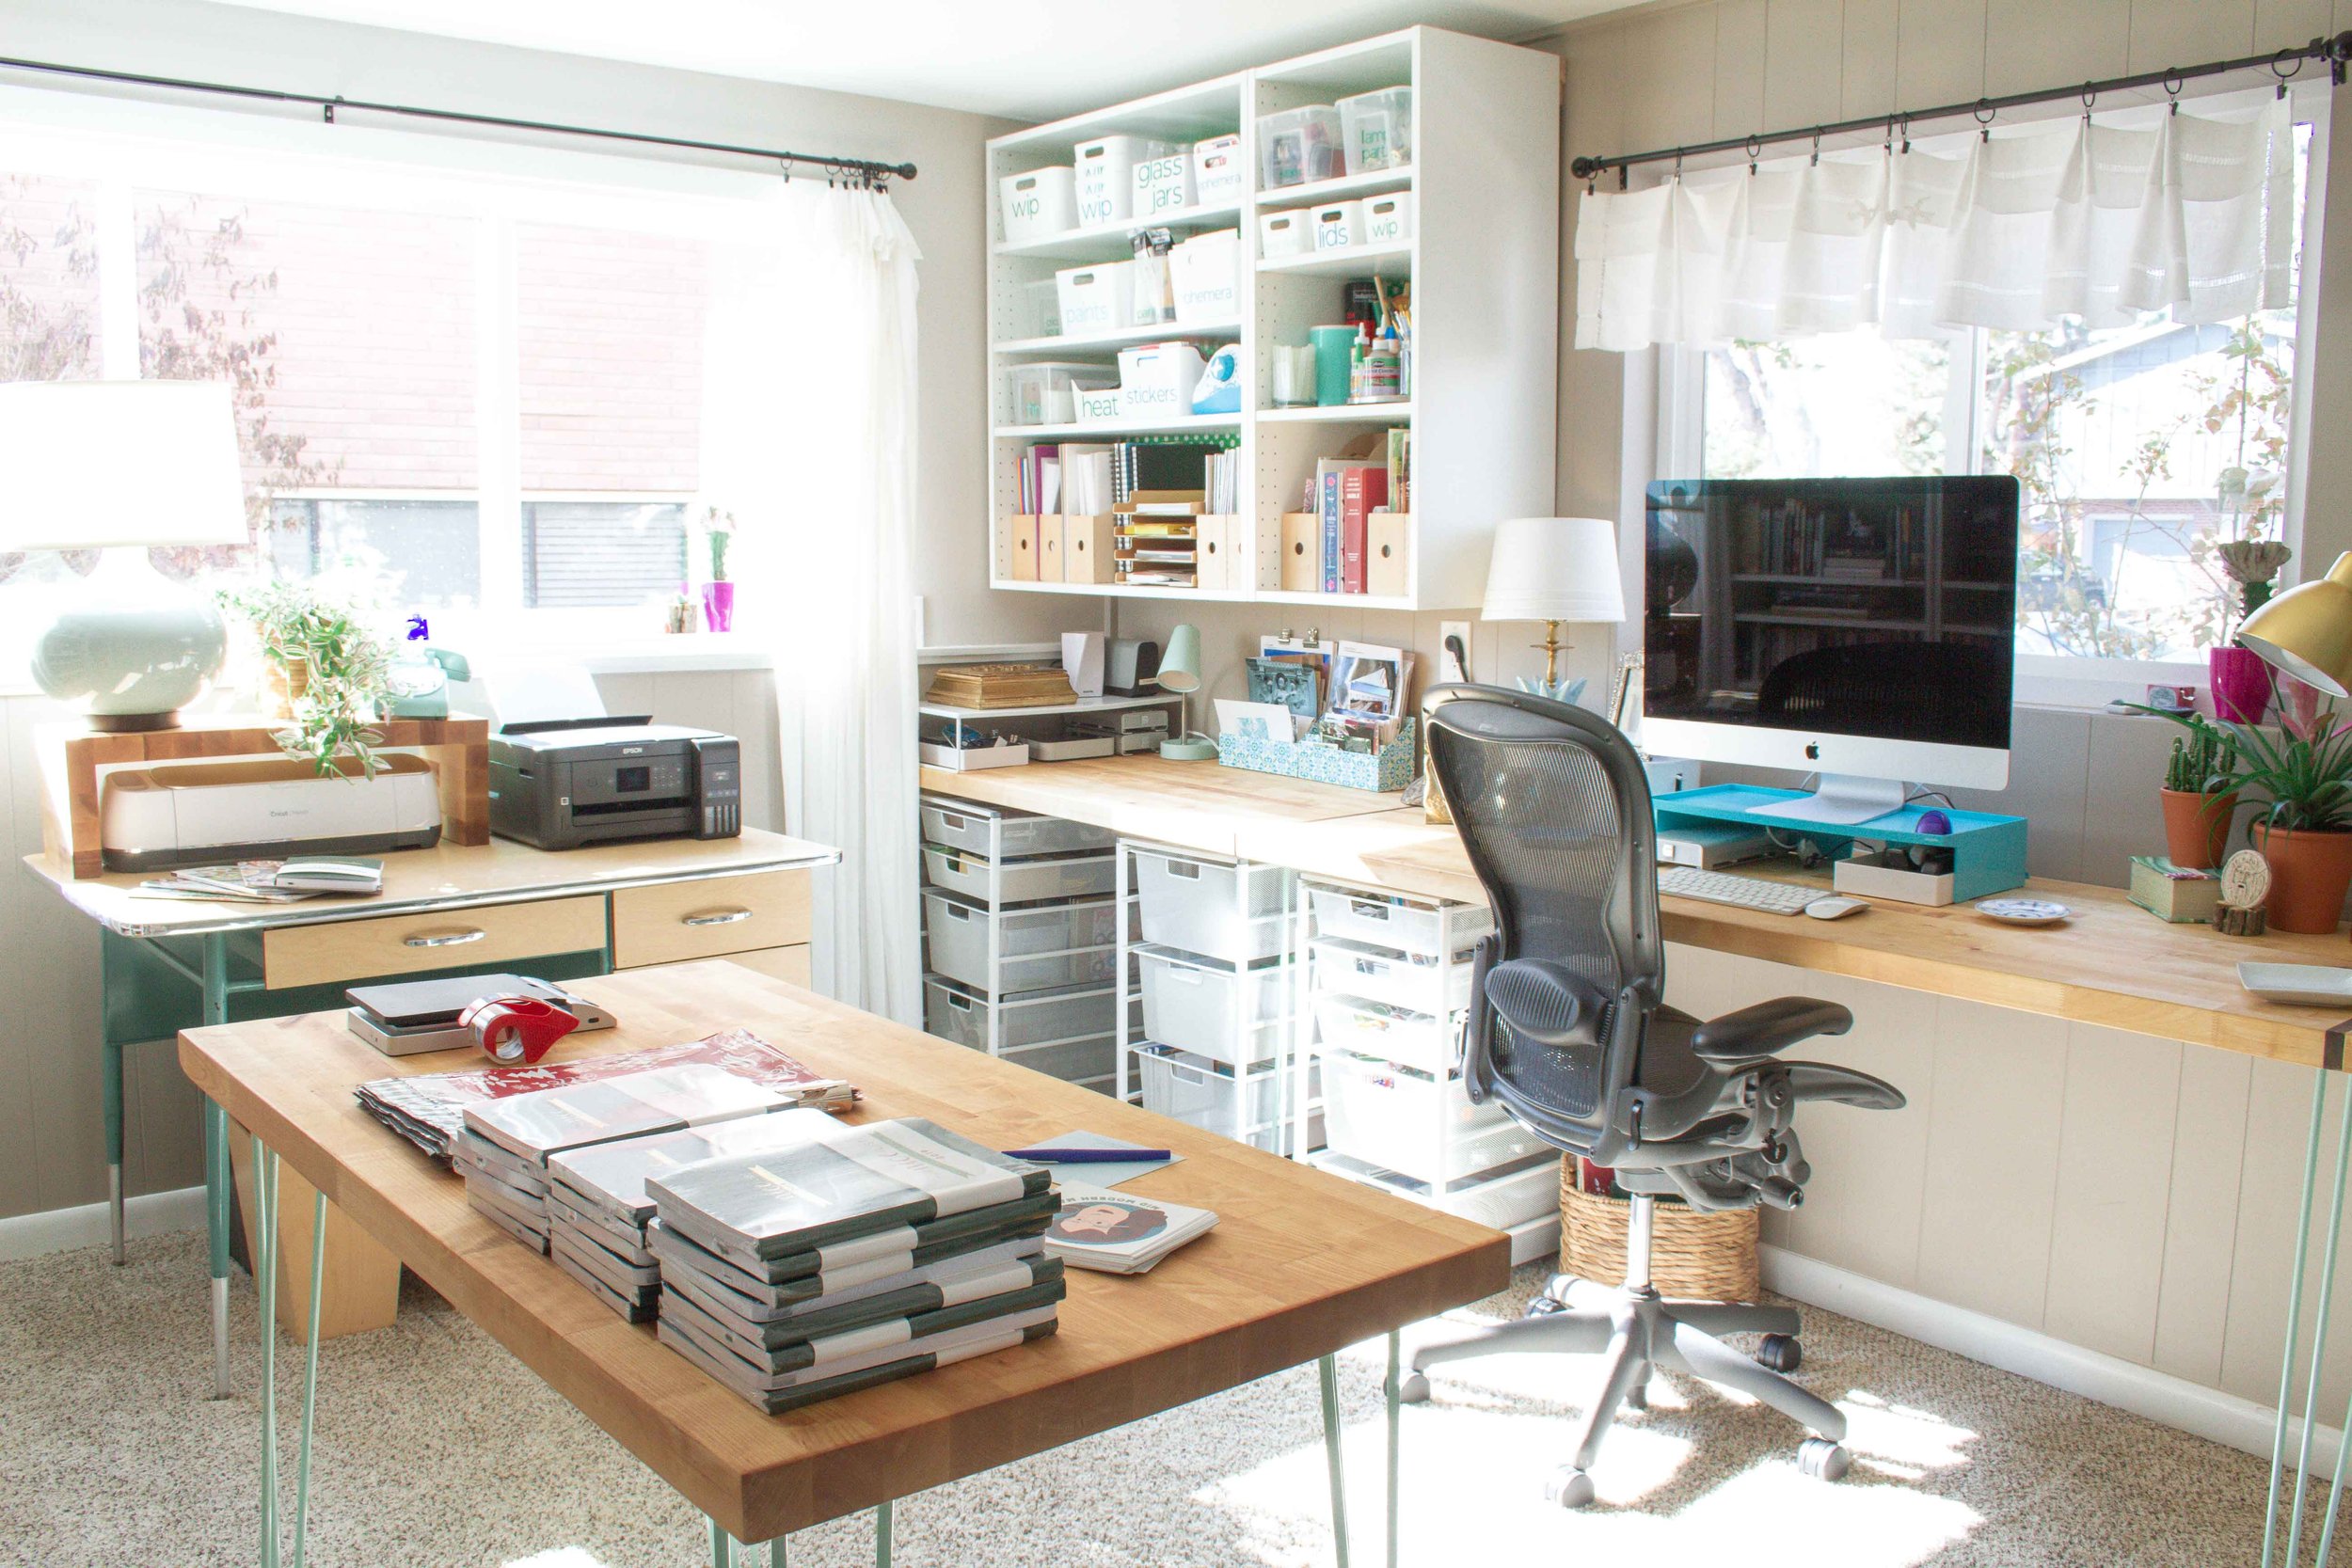 7 Things You Need to Create the perfect Cricut workspace for your